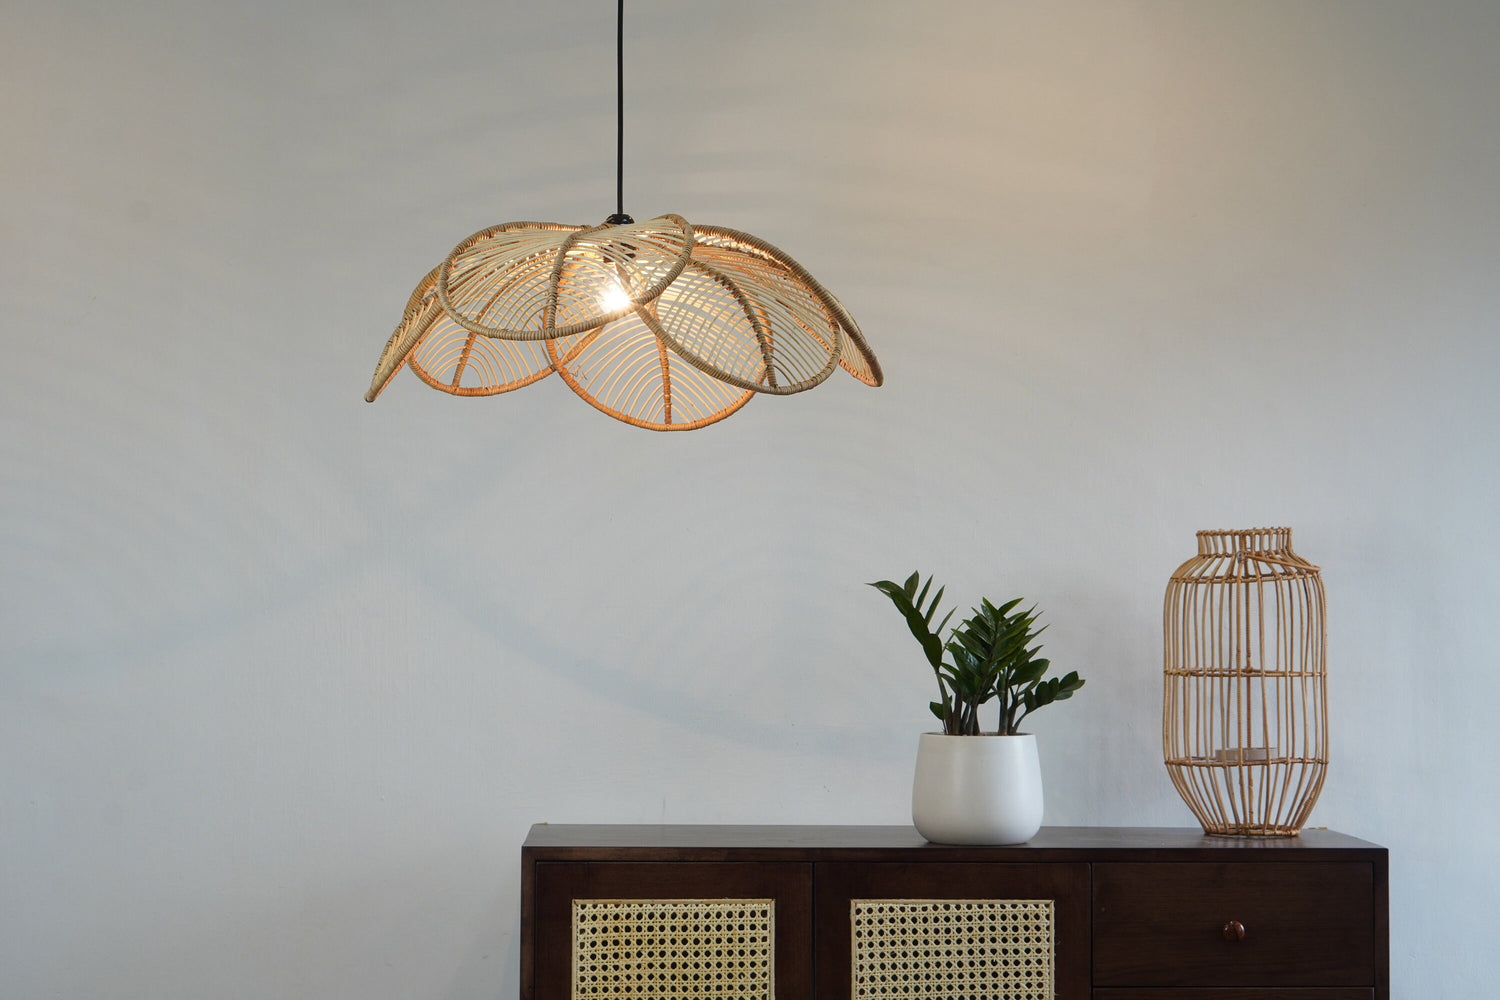 Lotus Flower Rattan Lampshade Handcrafted, Sustainable Eco Friendly Lighting, Pendant Light, Chandelier, Lampshade